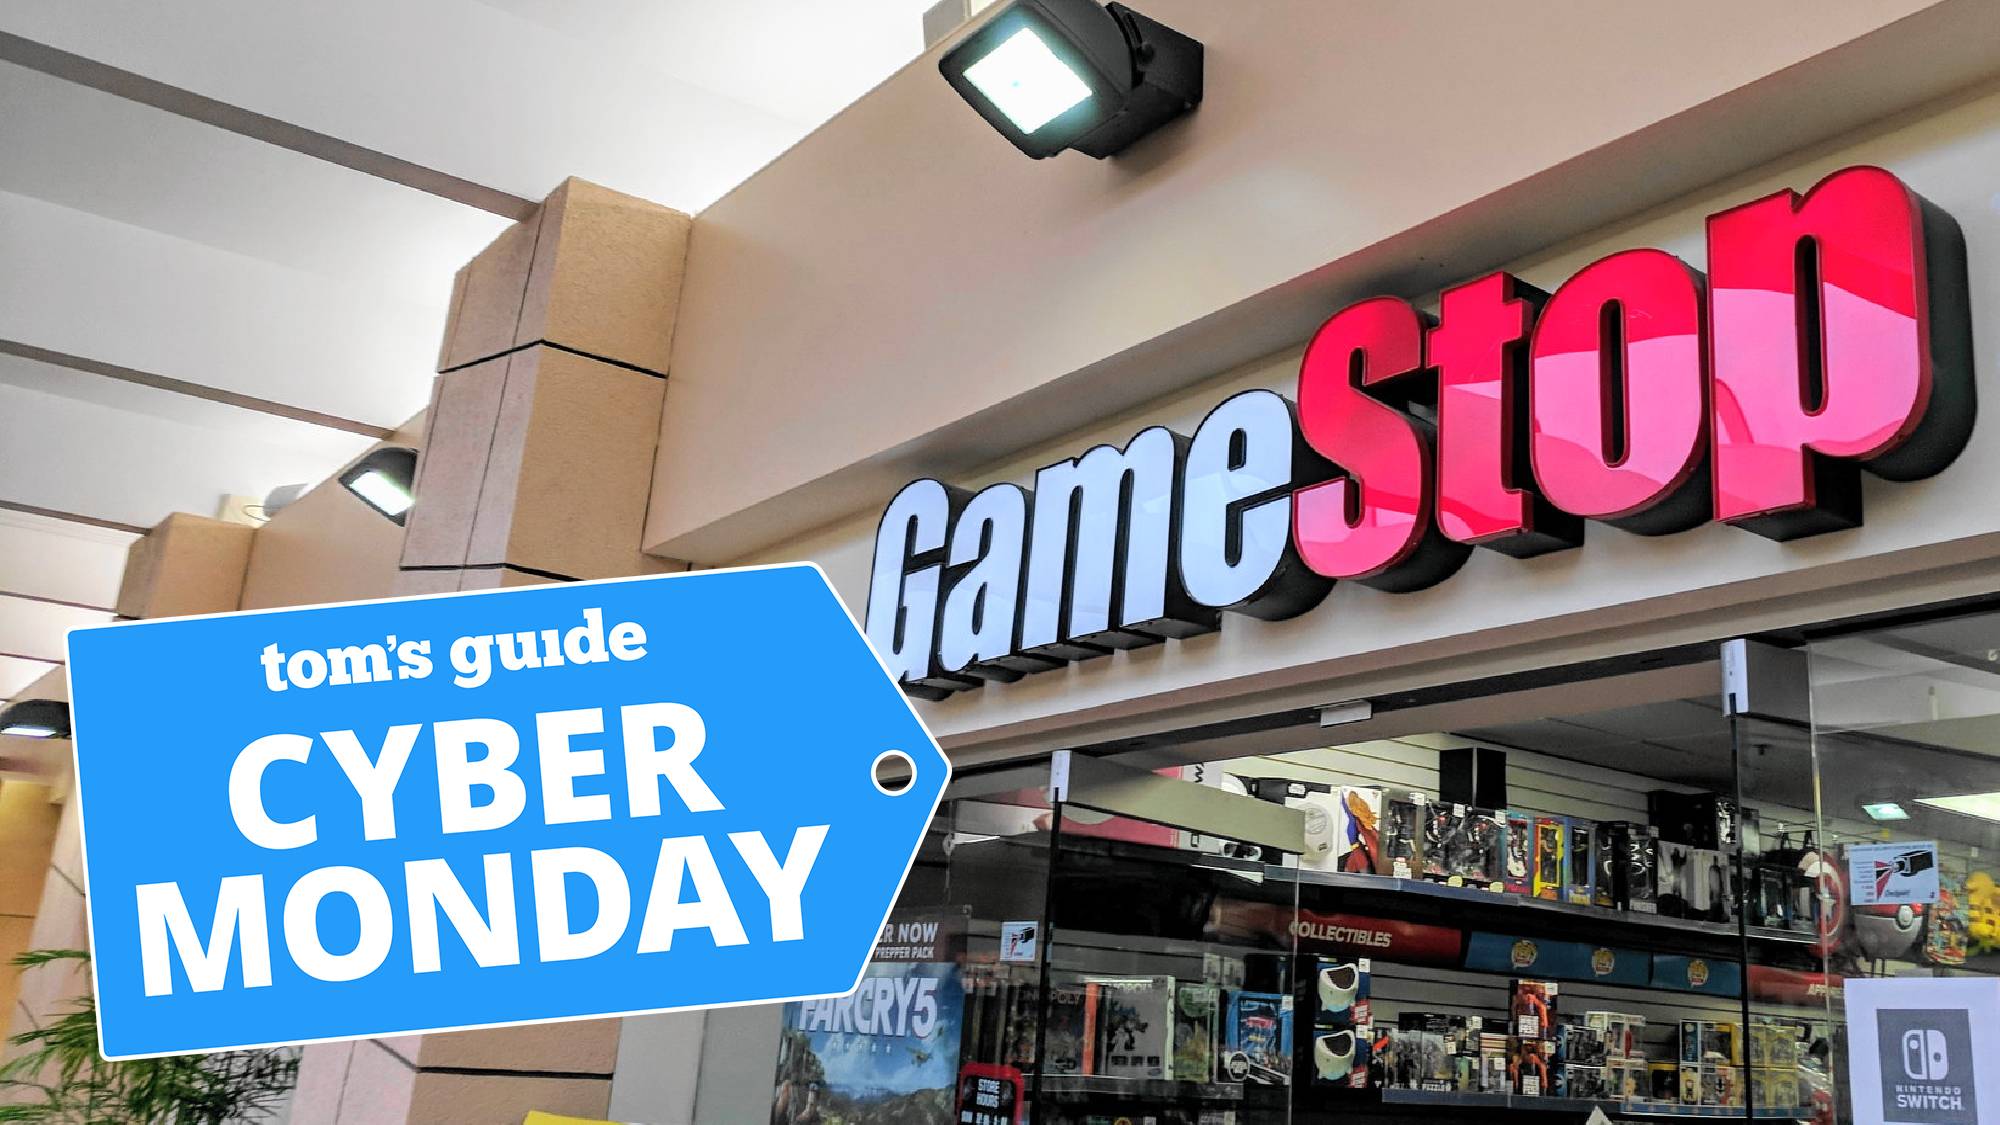 GameStop store sign with a Cyber Monday deal tag